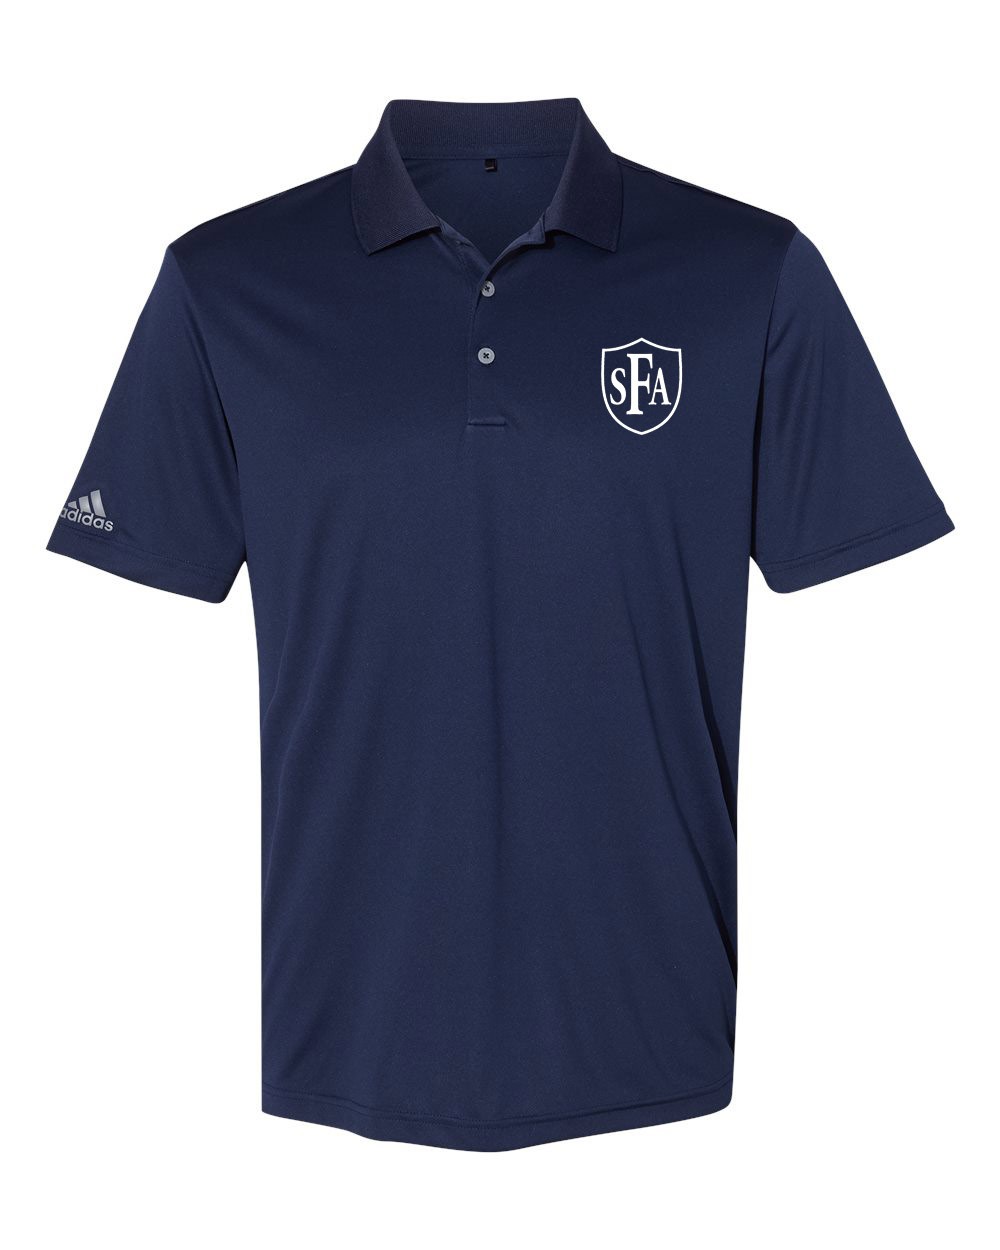 SFA Spirit Adidas Performance Sport Shirt w/Logo - Please Allow 2-3 Weeks For Delivery 